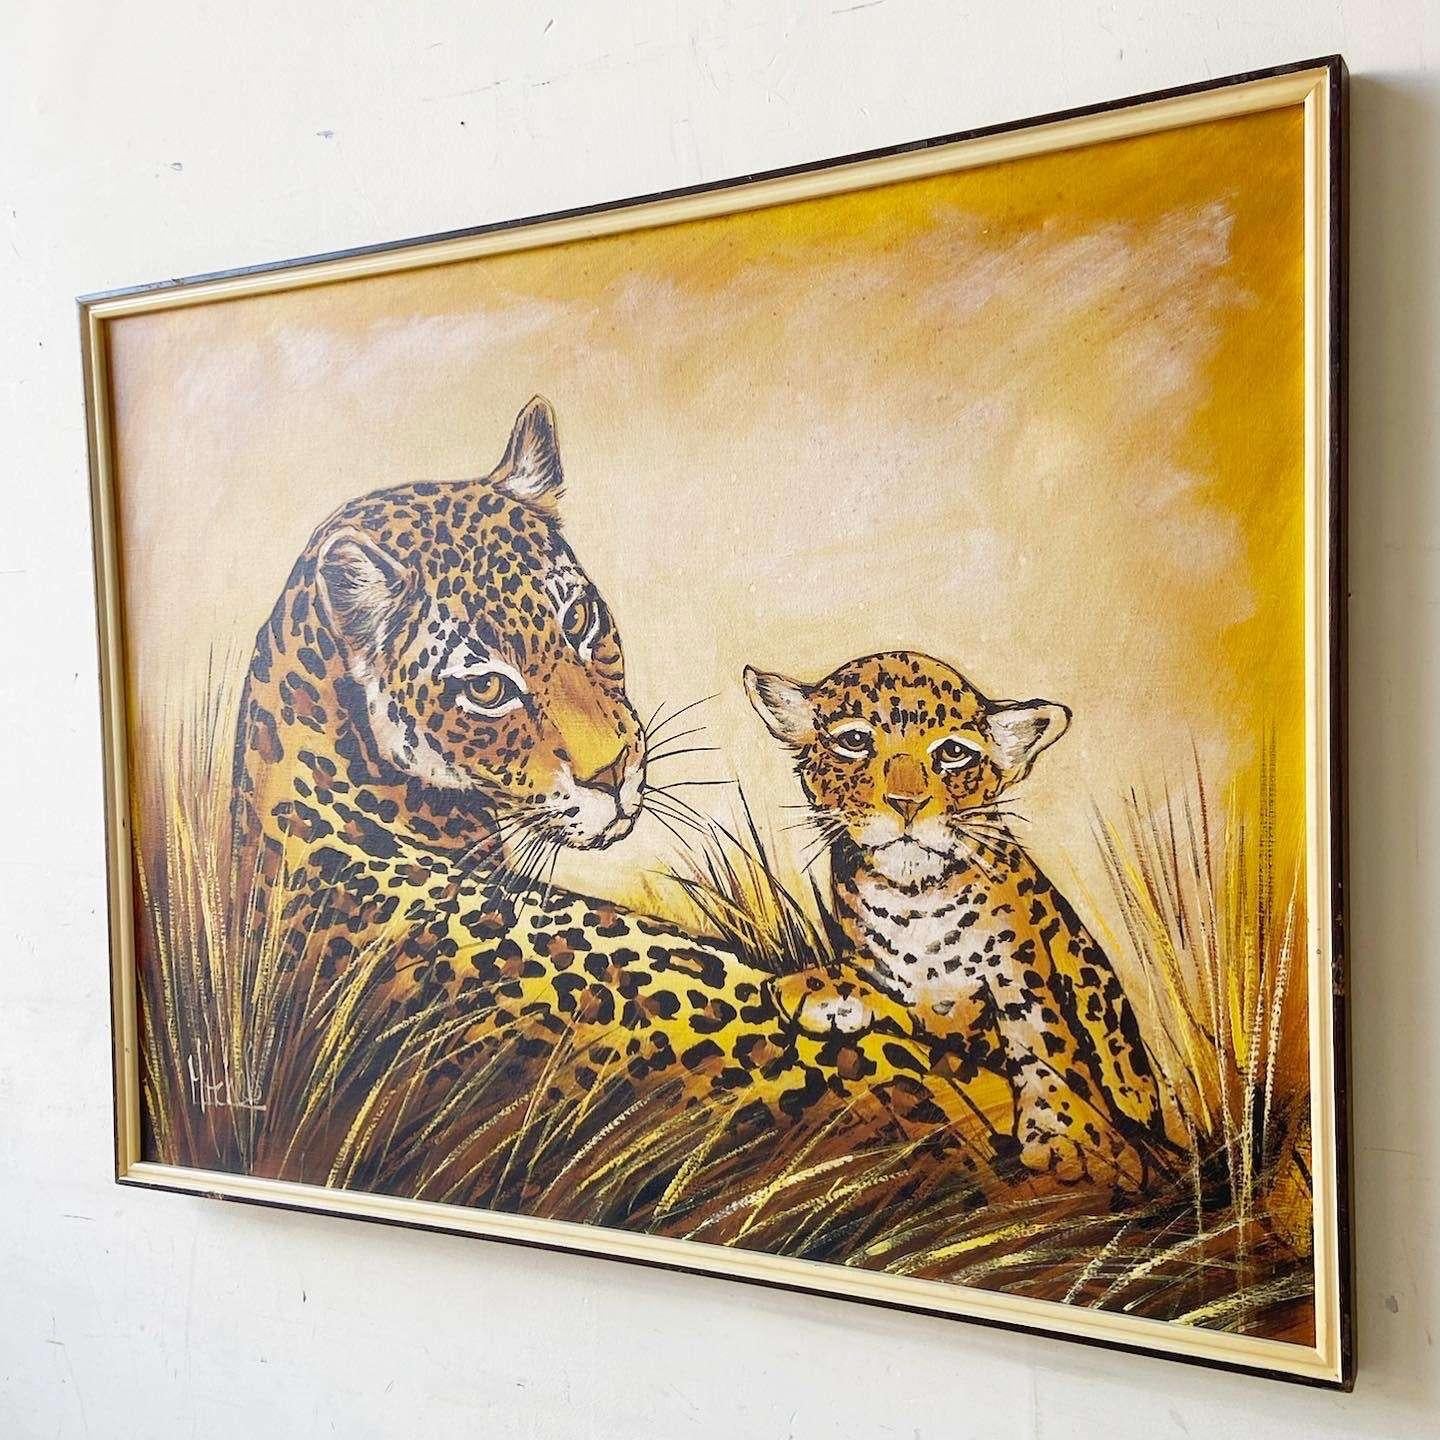 Canvas Vintage Framed and Signed Oil Painting of Cheetahs For Sale